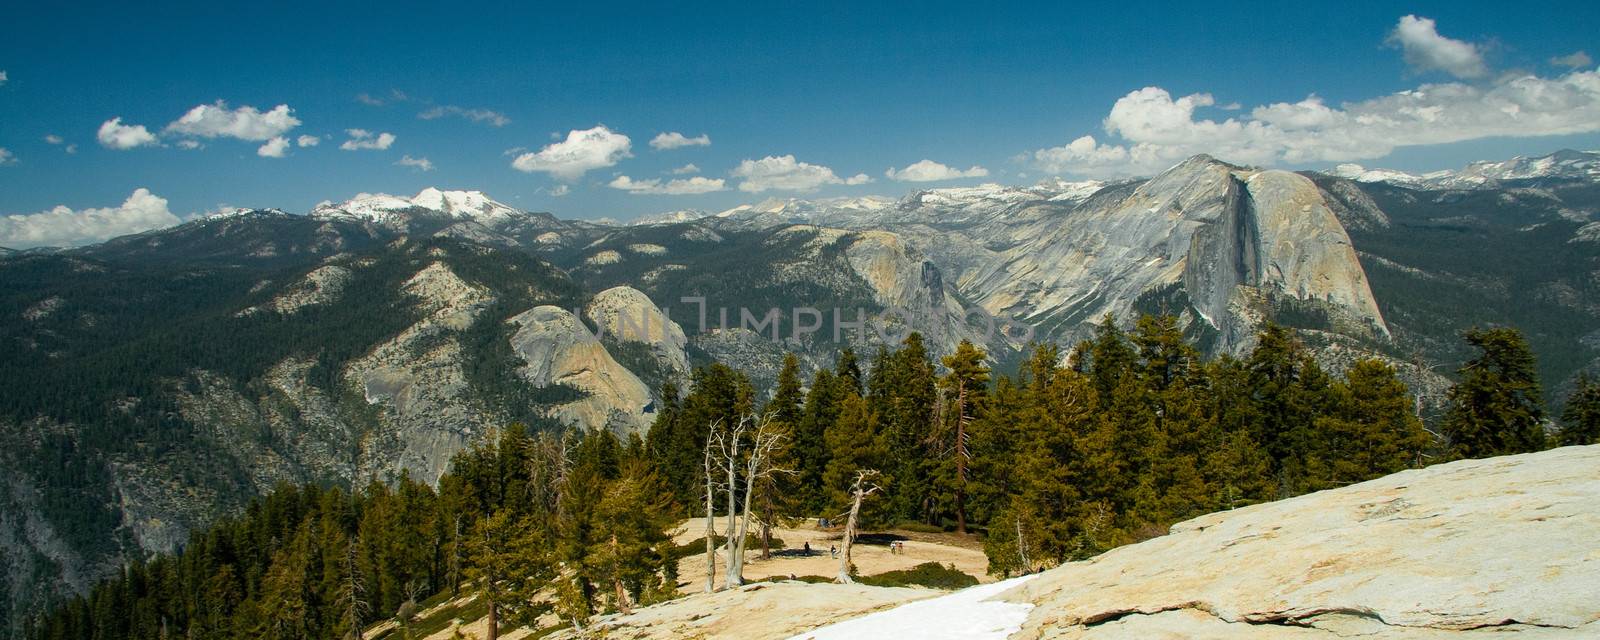 Scenic view Yosemite National Park viewed from Sentinel Dome, California, U.S.A.